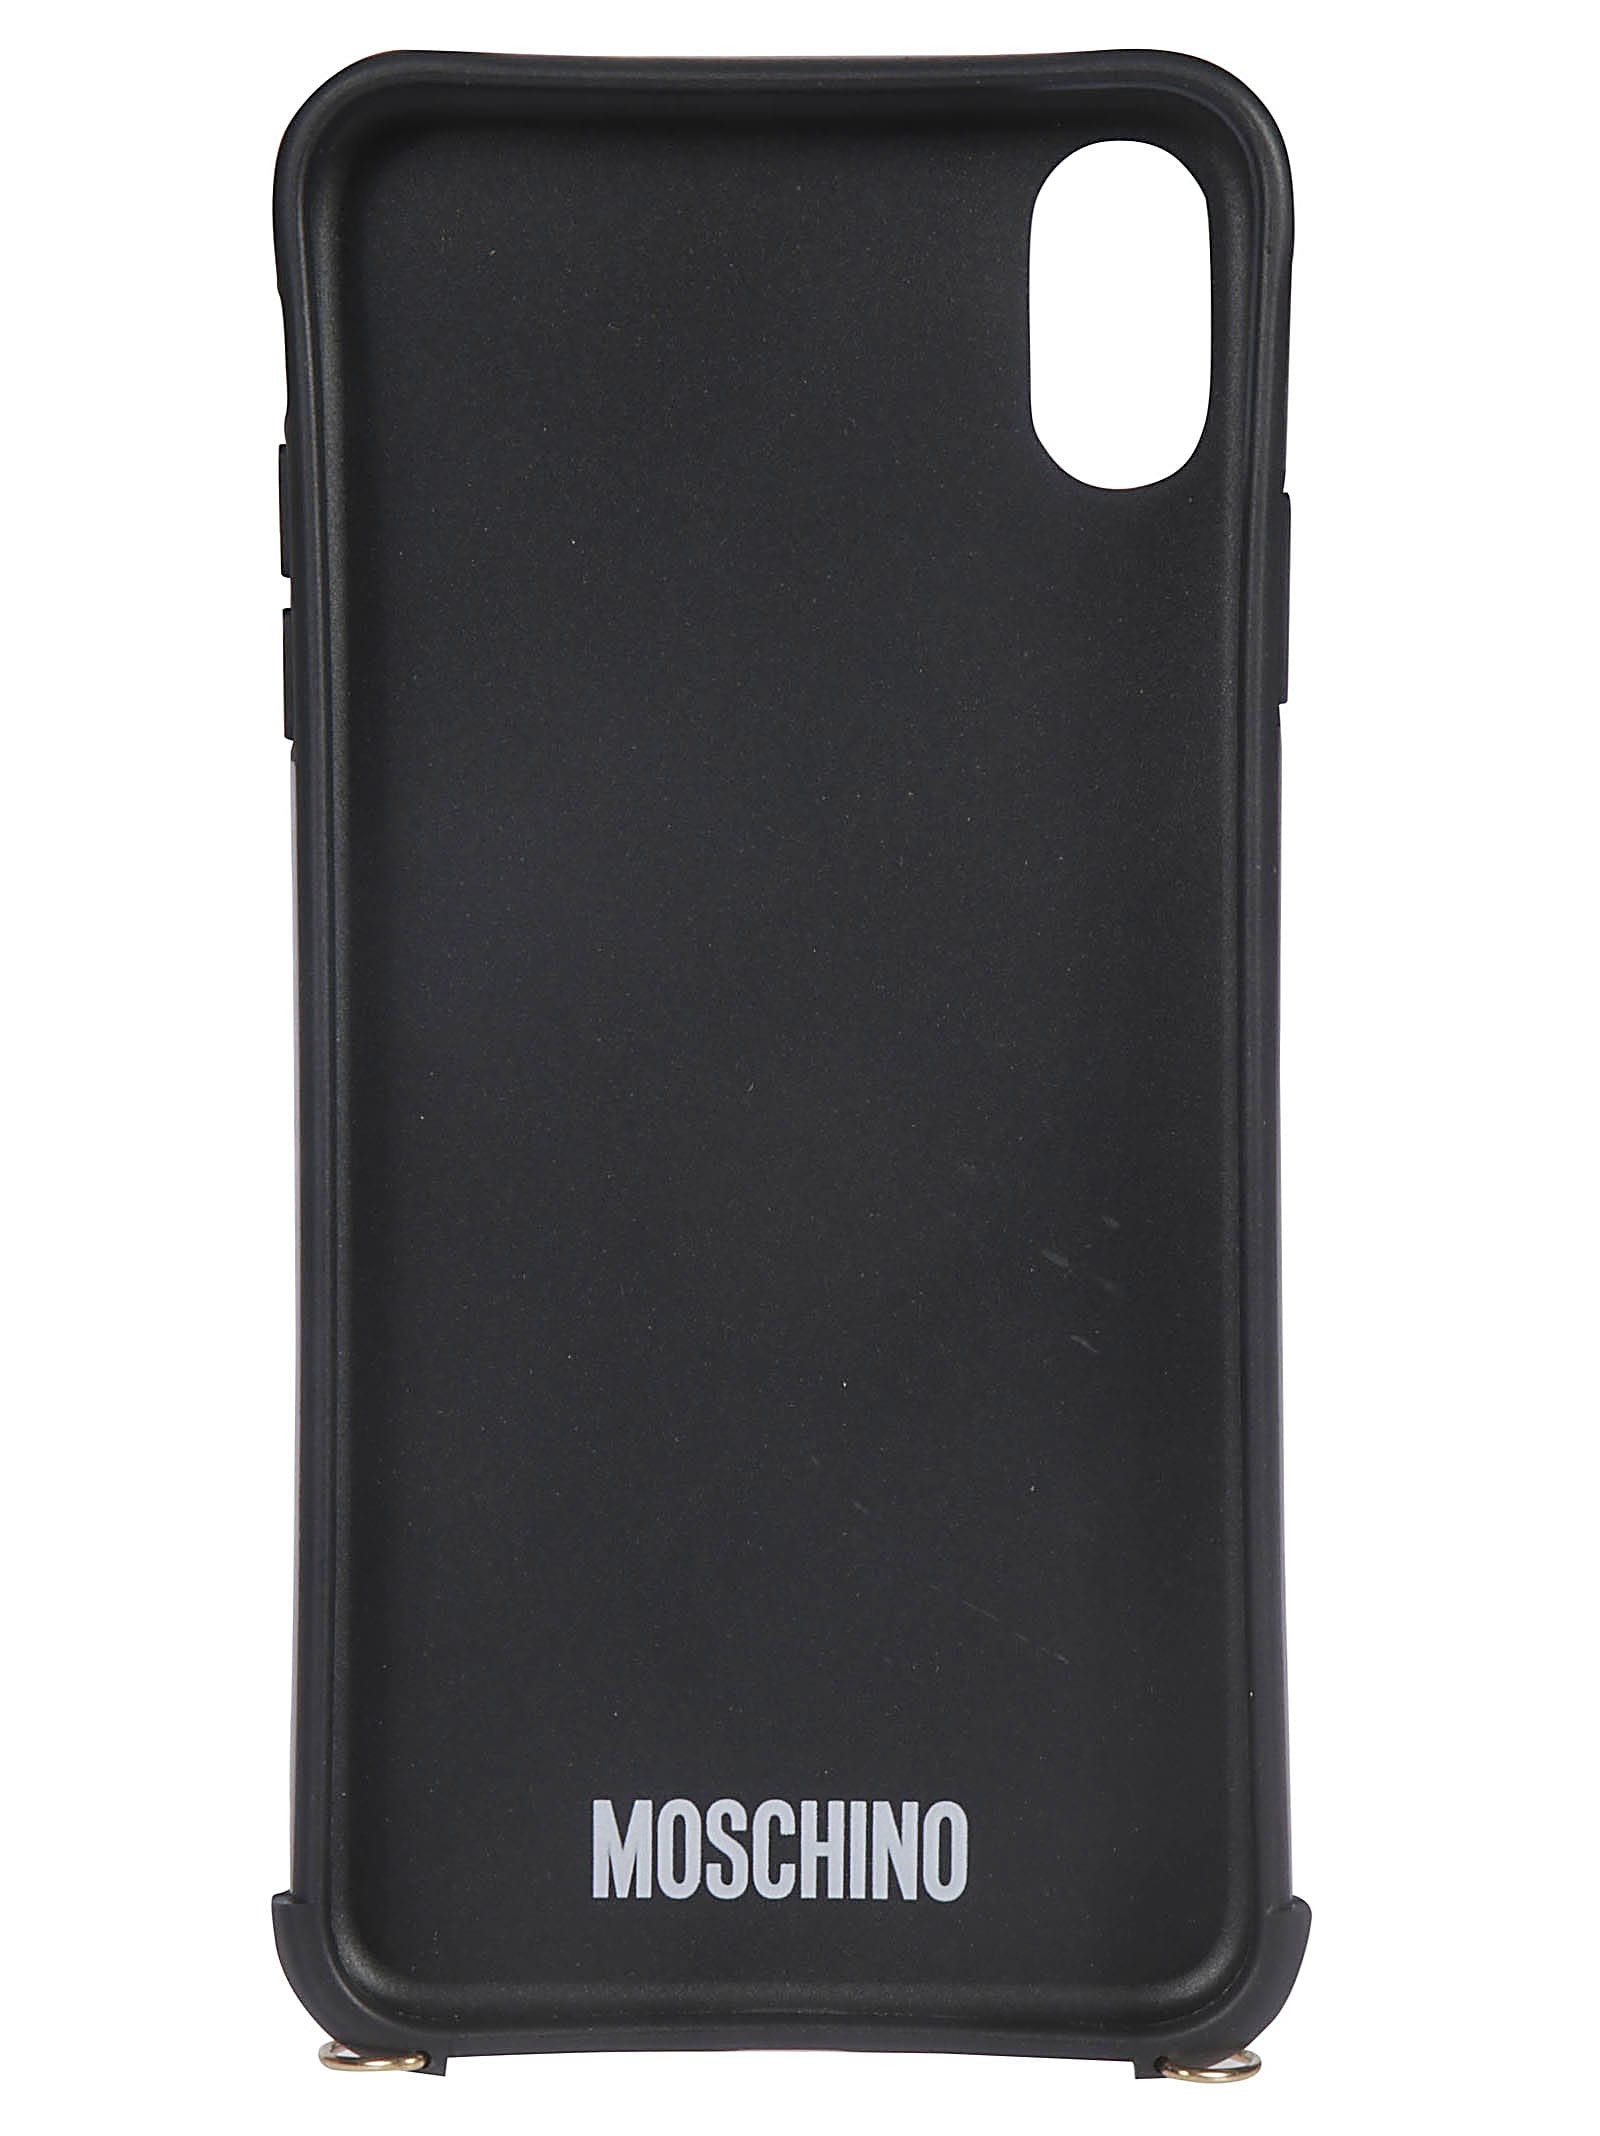 Moschino Phone Case Iphone Xr 9cbc90